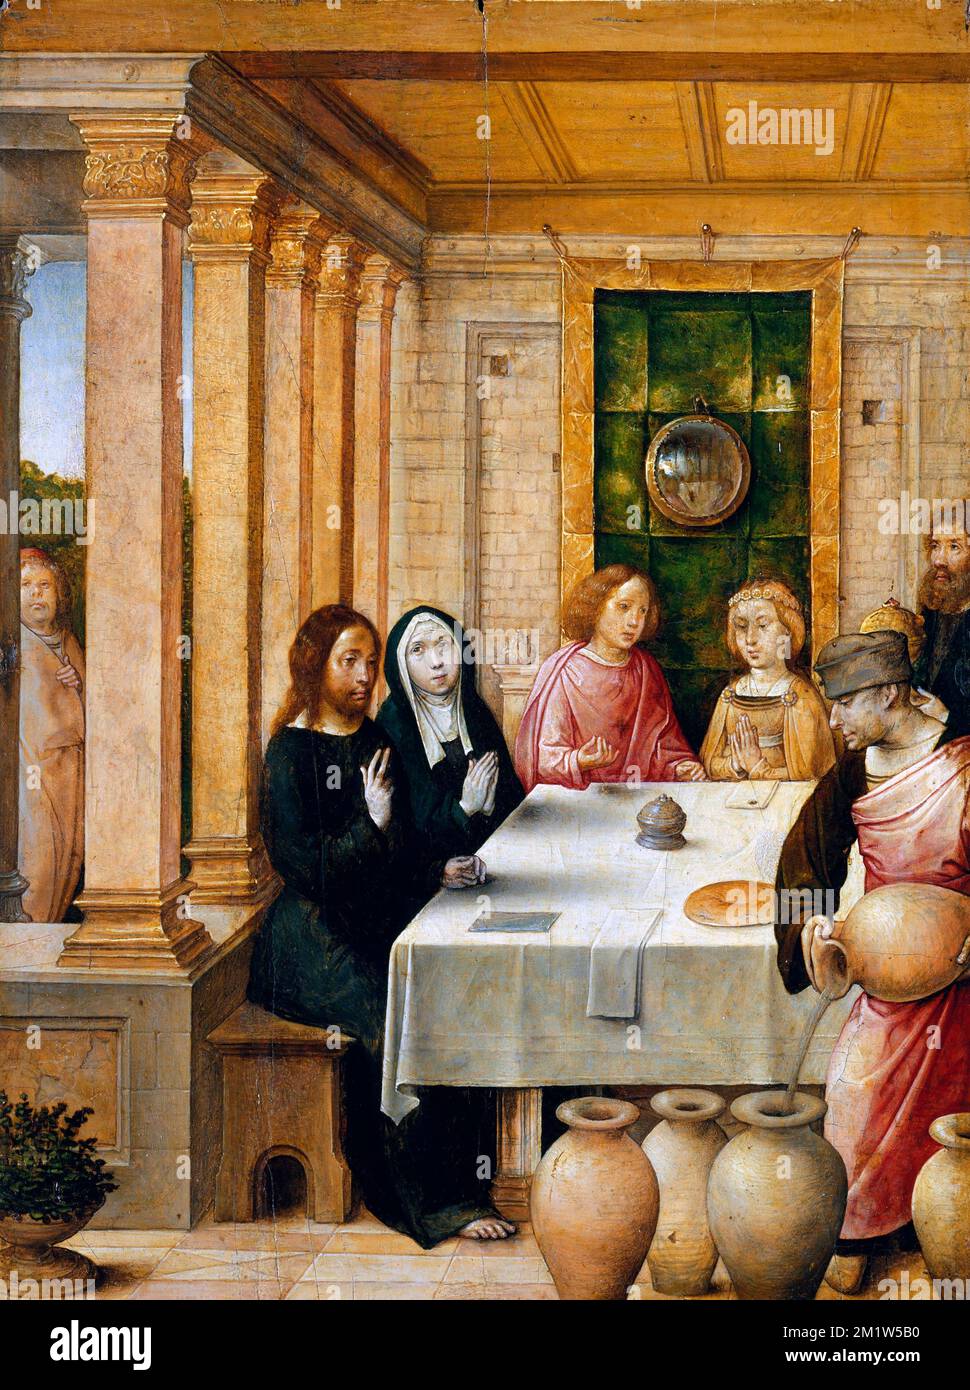 The Marriage Feast at Cana by Juan de Flandes (John of Flanders: c. 1460- c. 1519), oil on wood, c. 1500-04 Stock Photo